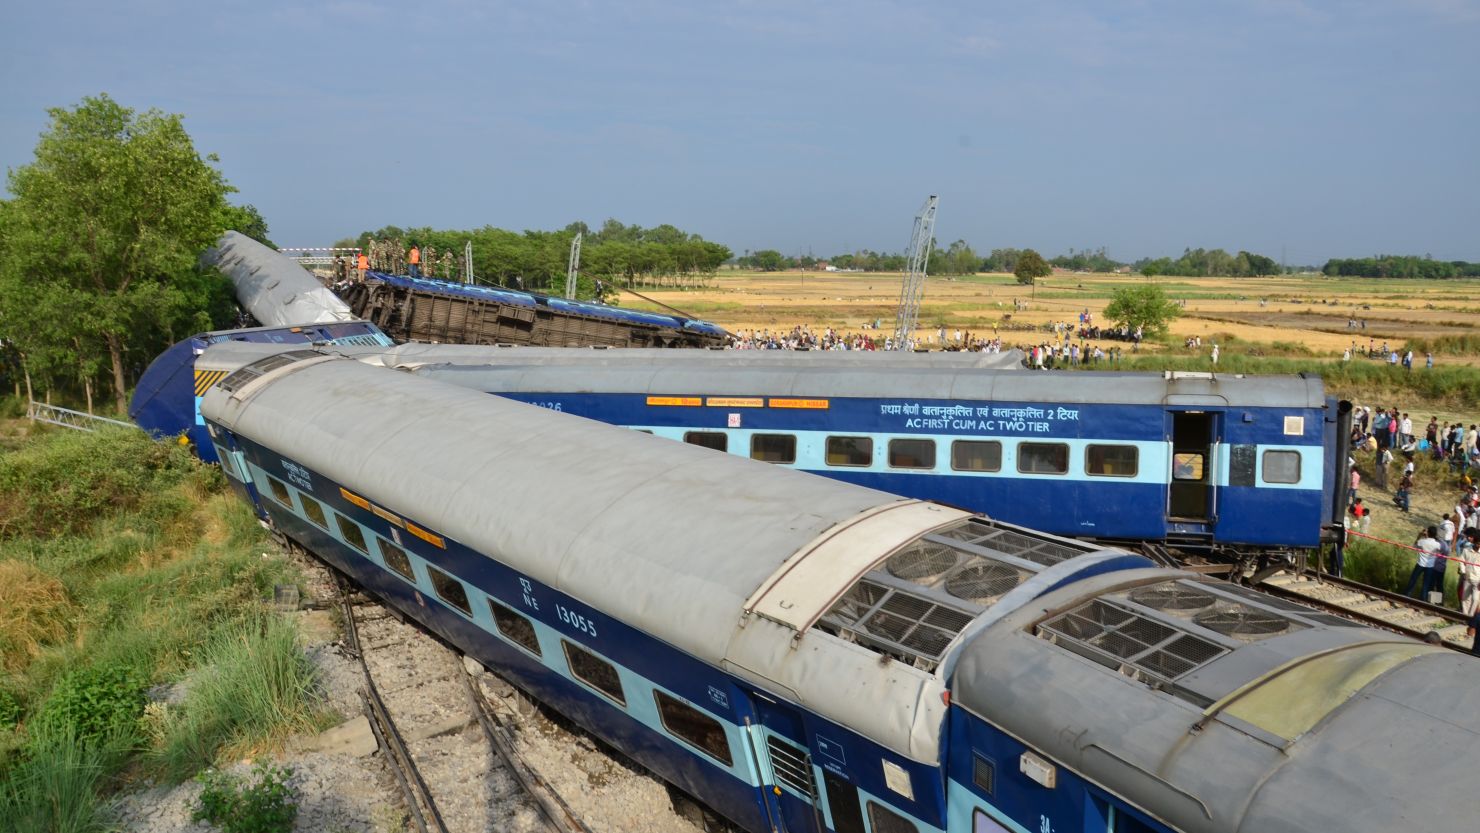 Preliminary reports indicate that six cars of the Gorakhdam Express passenger train collided with a stationary cargo train.